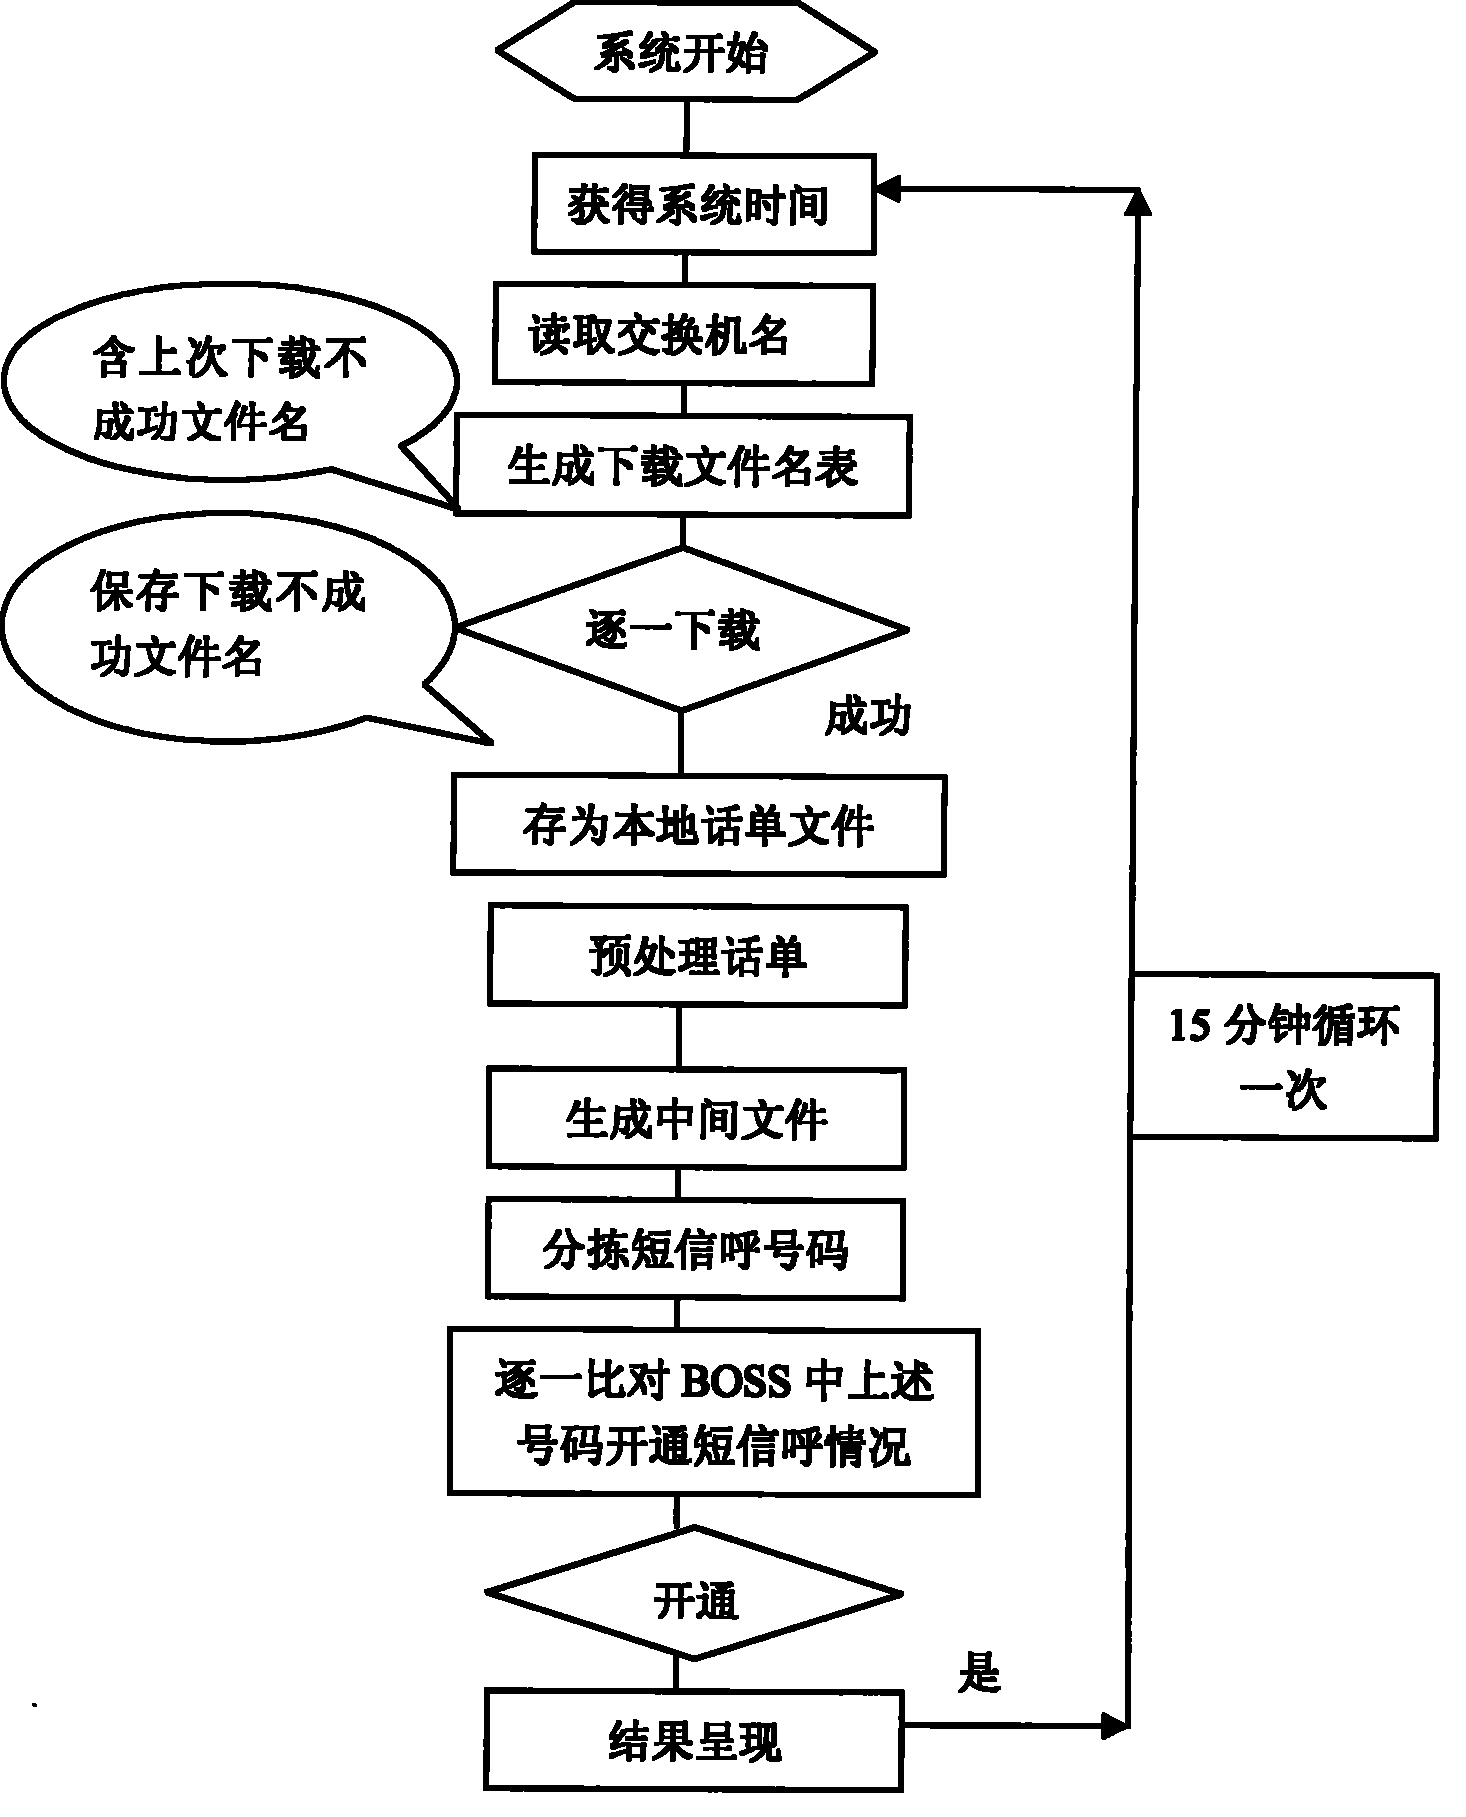 Method and system for fast positioning, downloading and efficiently sorting call bill